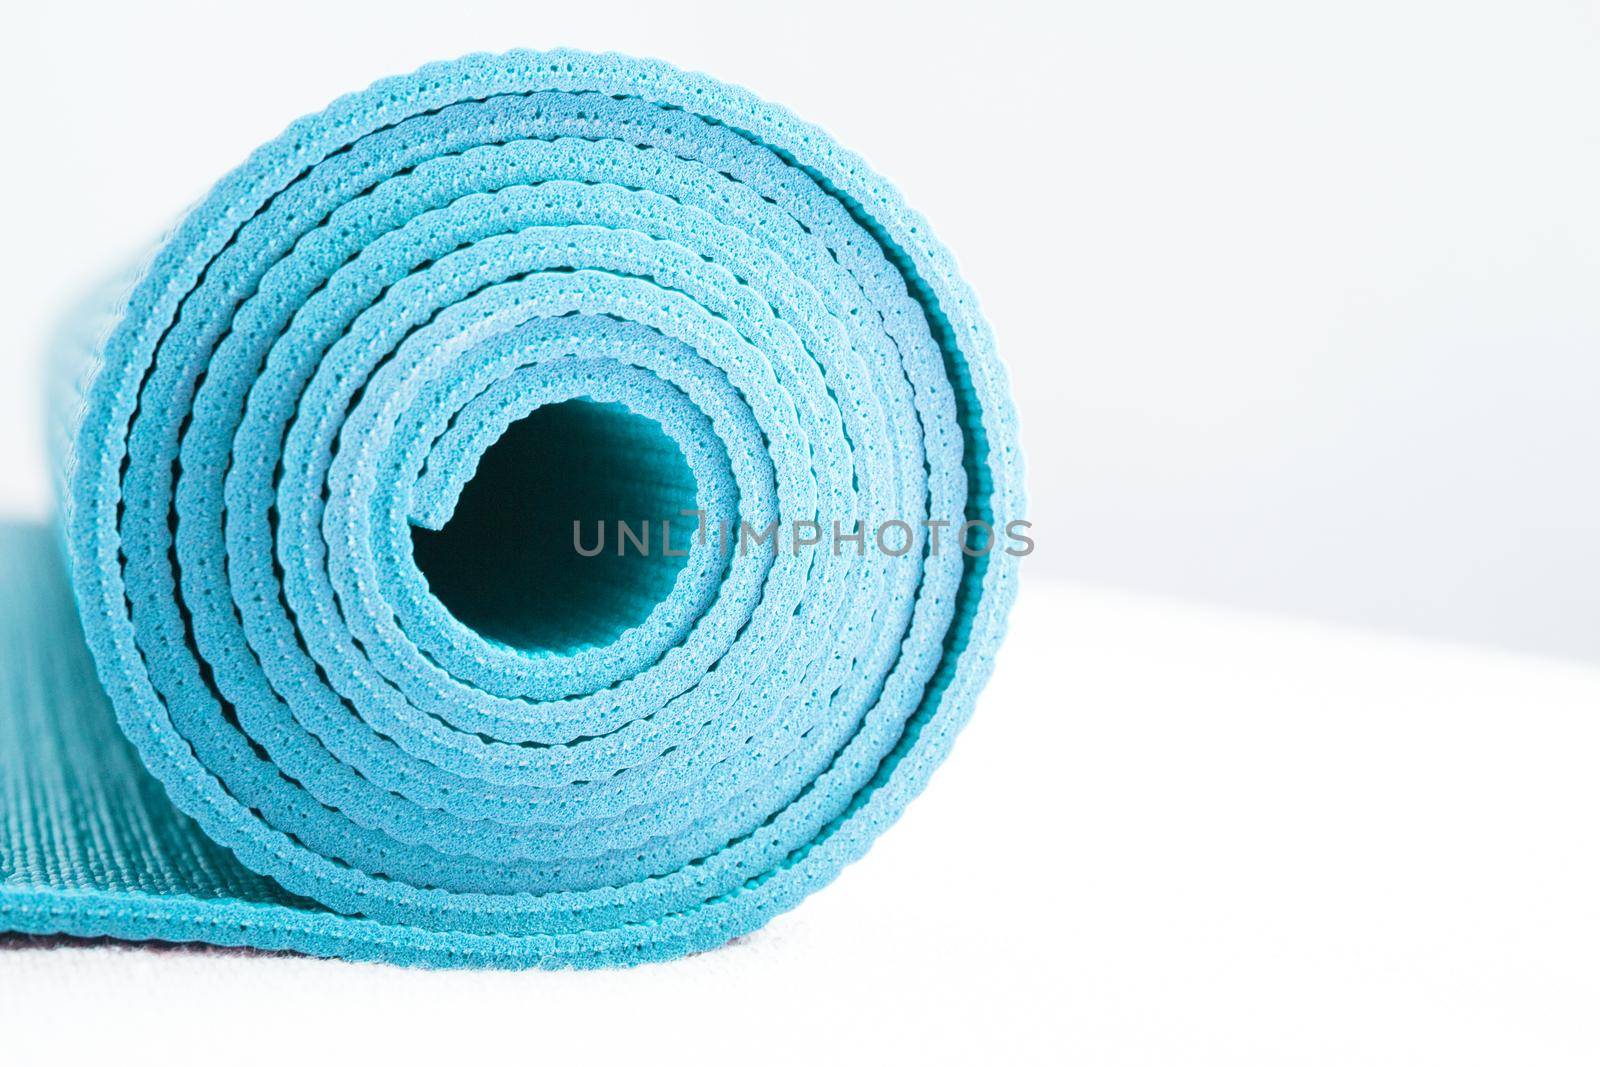 Rolled up yoga or pilates mat. No people